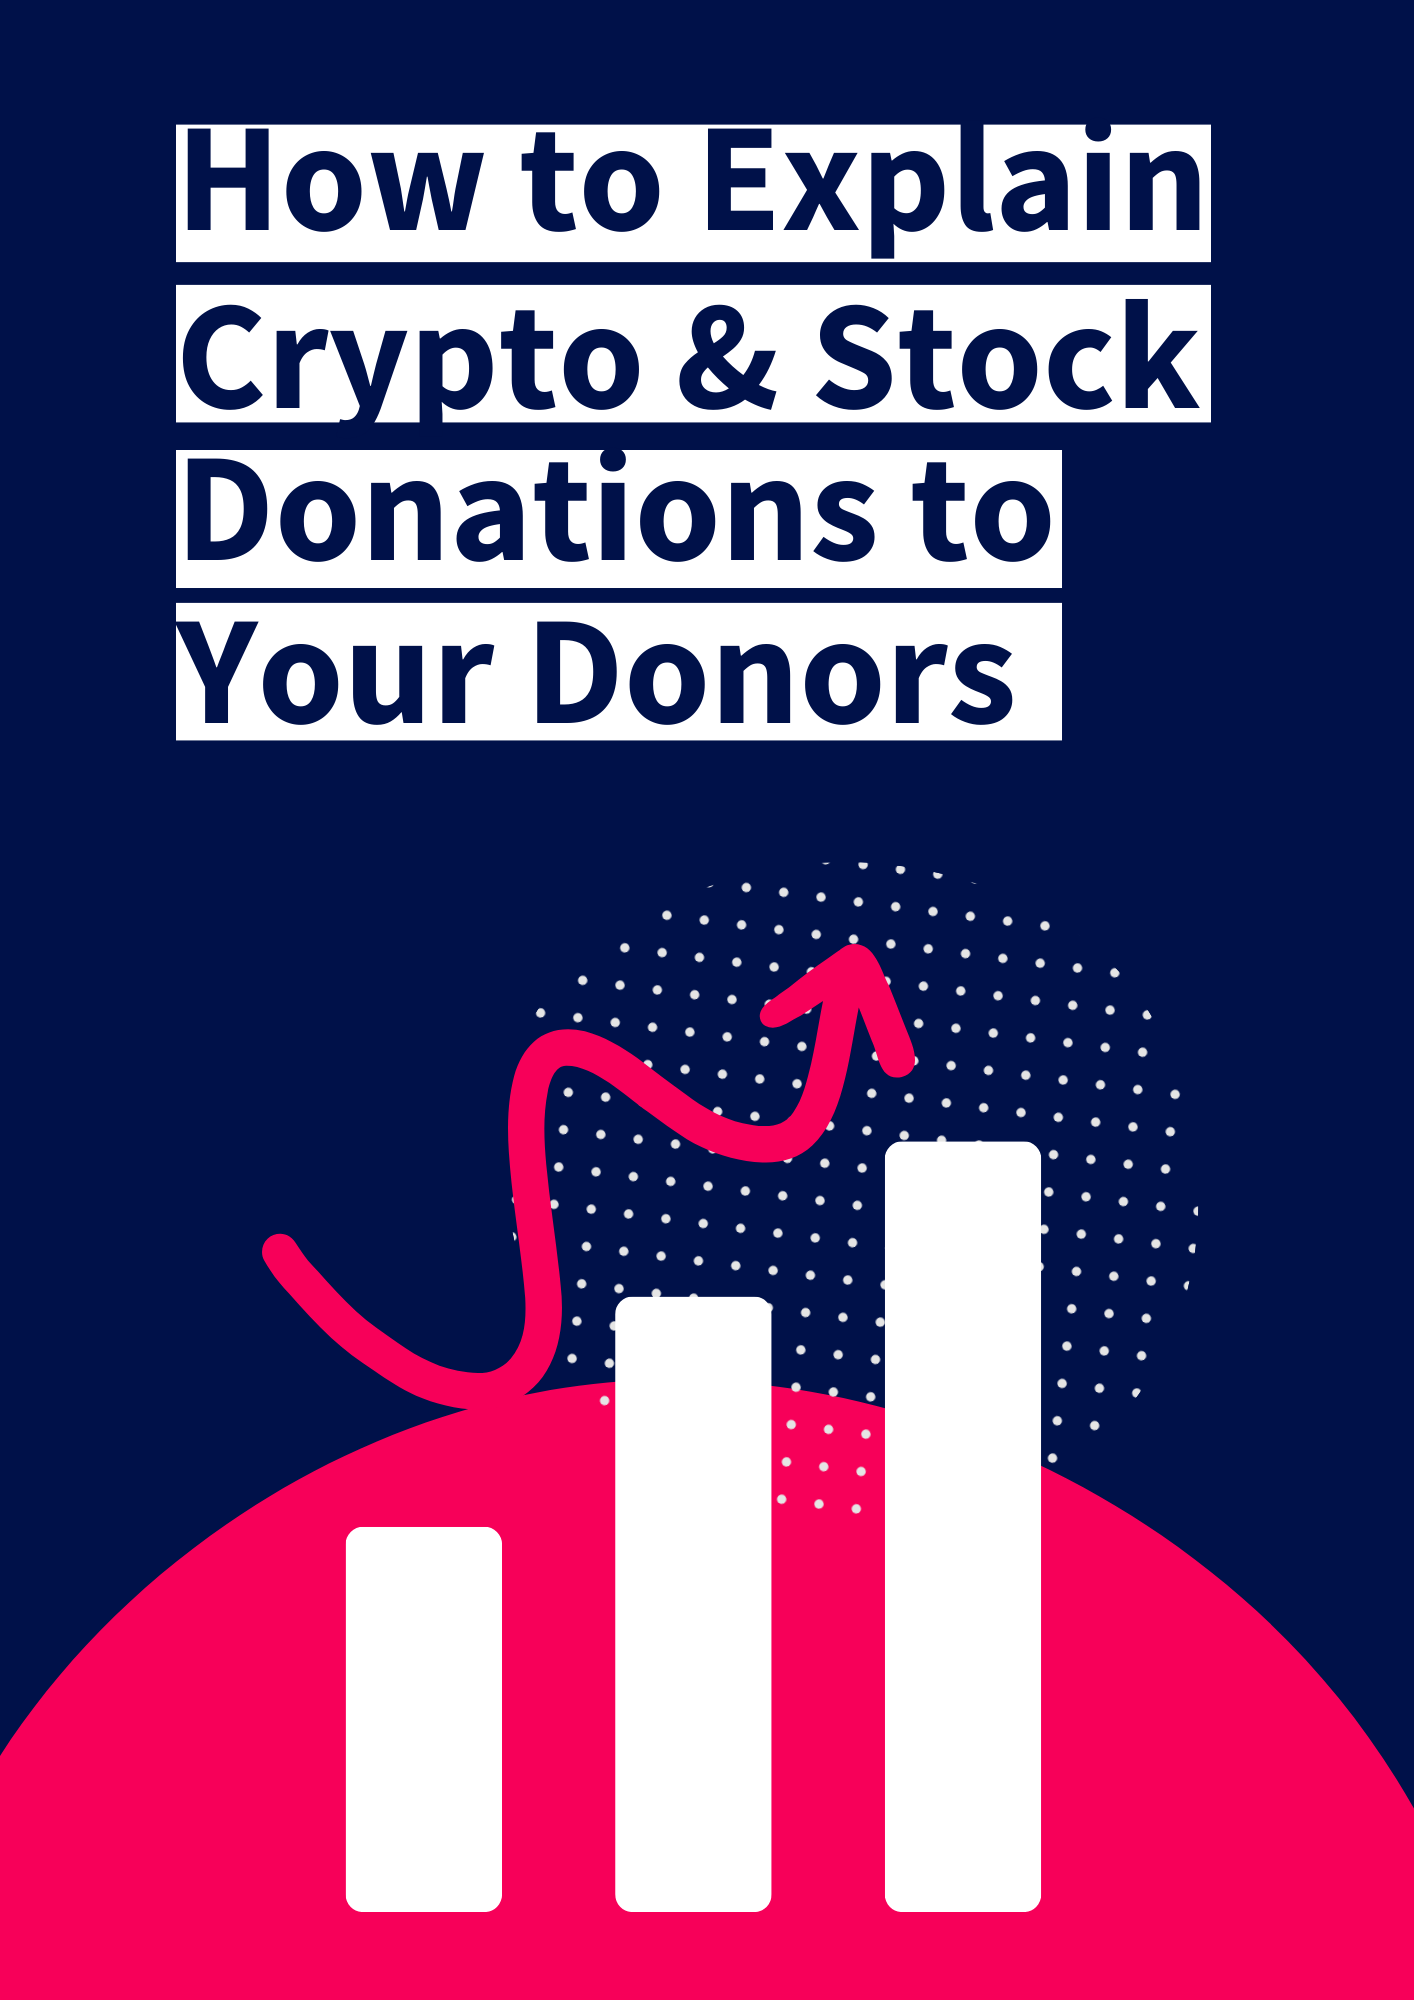 How to Explain Crypto & Stock Donations to Your Donors